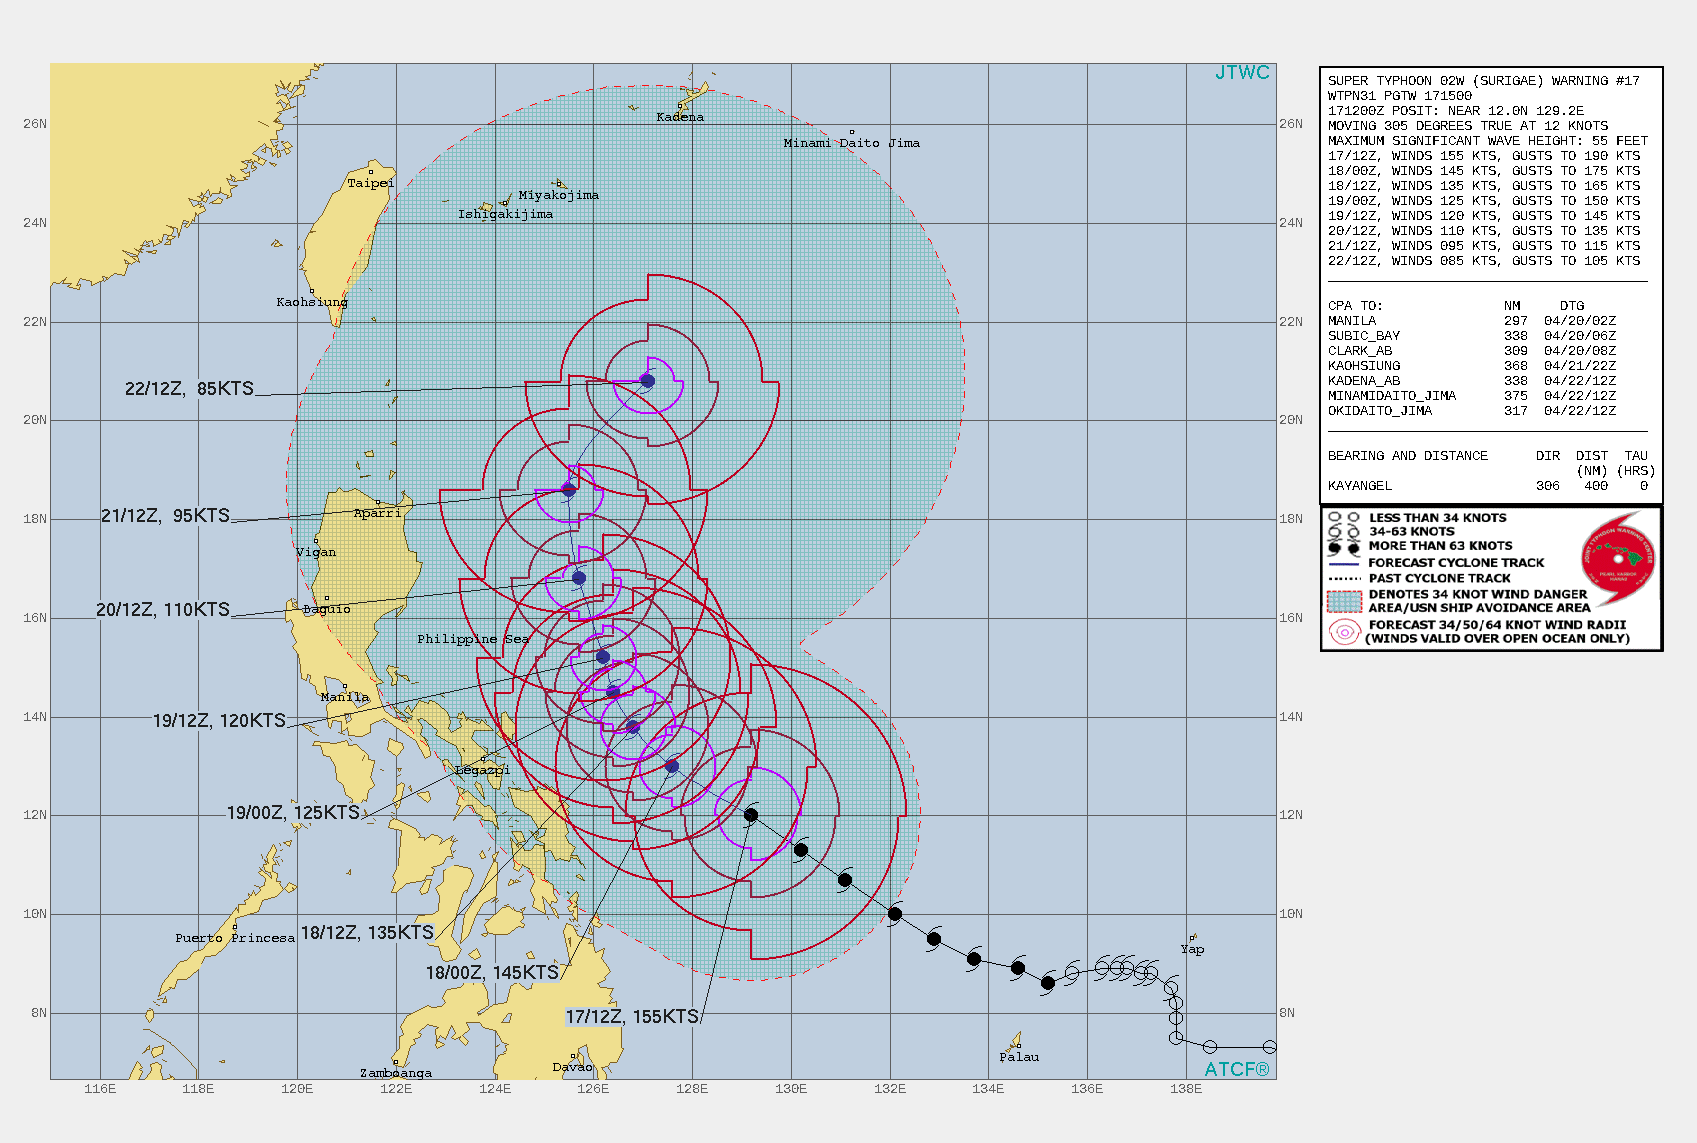 02W(SURIGAE). WARNING 17 ISSUED AT 17/15UTC.ENVIRONMENTAL ANALYSIS INDICATES ROBUST EQUATORWARD AND POLEWARD  OUTFLOW, LOW (5-10 KTS) VERTICAL WIND SHEAR, AND WARM (29-30C) SEA  SURFACE TEMPERATURES IN THE PHILIPPINE SEA CONTRIBUTING TO AN  OVERALL FAVORABLE ENVIRONMENT. SUPER TYPHOON(STY) 02W IS TRACKING TOWARD A BREAK IN  THE RIDGE TO THE NORTH.STY 02W WILL CONTINUE ON ITS CURRENT NORTHWESTWARD TRACK.  AFTER 12H, THE SPLIT SUBTROPICAL RIDGE (STR) TO THE NORTHEAST  WILL BUILD, REORIENT AND TAKE OVER AS THE PRIMARY STEERING  MECHANISM, DRIVING THE CYCLONE TO A SLOW NORTHWARD TRAJECTORY AS IT  ENTERS A WEAK STEERING ENVIRONMENT. AS THE SYSTEM GAINS LATITUDE,  DIVERGENCE ALOFT WILL DECREASE AND CAUSE THE SYSTEM TO SLOWLY  WEAKEN, DOWN TO 110KNOTS/CAT 3 BY 72H. AFTER 72H, STY SURIGAE WILL CONTINUE NORTHWARD ALONG THE  WESTERN PERIPHERY OF THE STR, CREST THE AXIS, THEN ACCELERATE  NORTHEASTWARD ON THE POLEWARD SIDE. AS IT MOVES FURTHER NORTH, THE  ENVIRONMENT WILL SLOWLY BECOME LESS FAVORABLE AS UPPER LEVEL  DIVERGENCE CONTINUES TO DECREASE LEADING TO GRADUAL WEAKENING,  DOWN TO 85KNOTS/CAT 2 BY 120H.